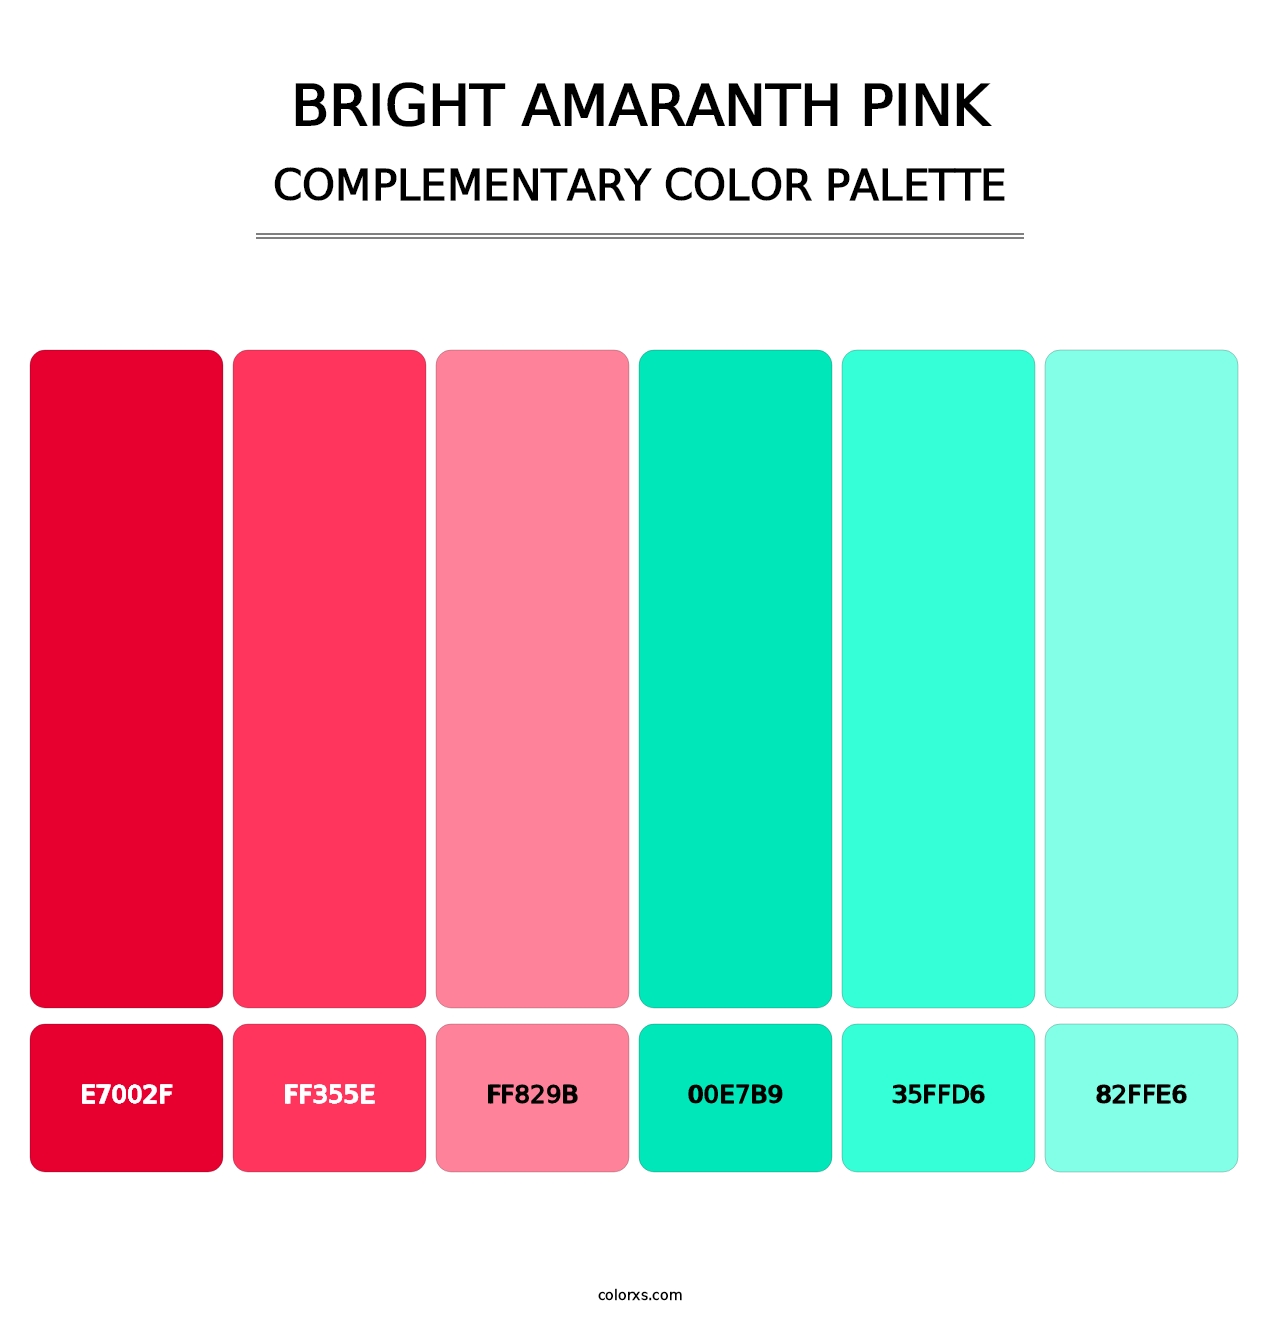 Bright Amaranth Pink - Complementary Color Palette